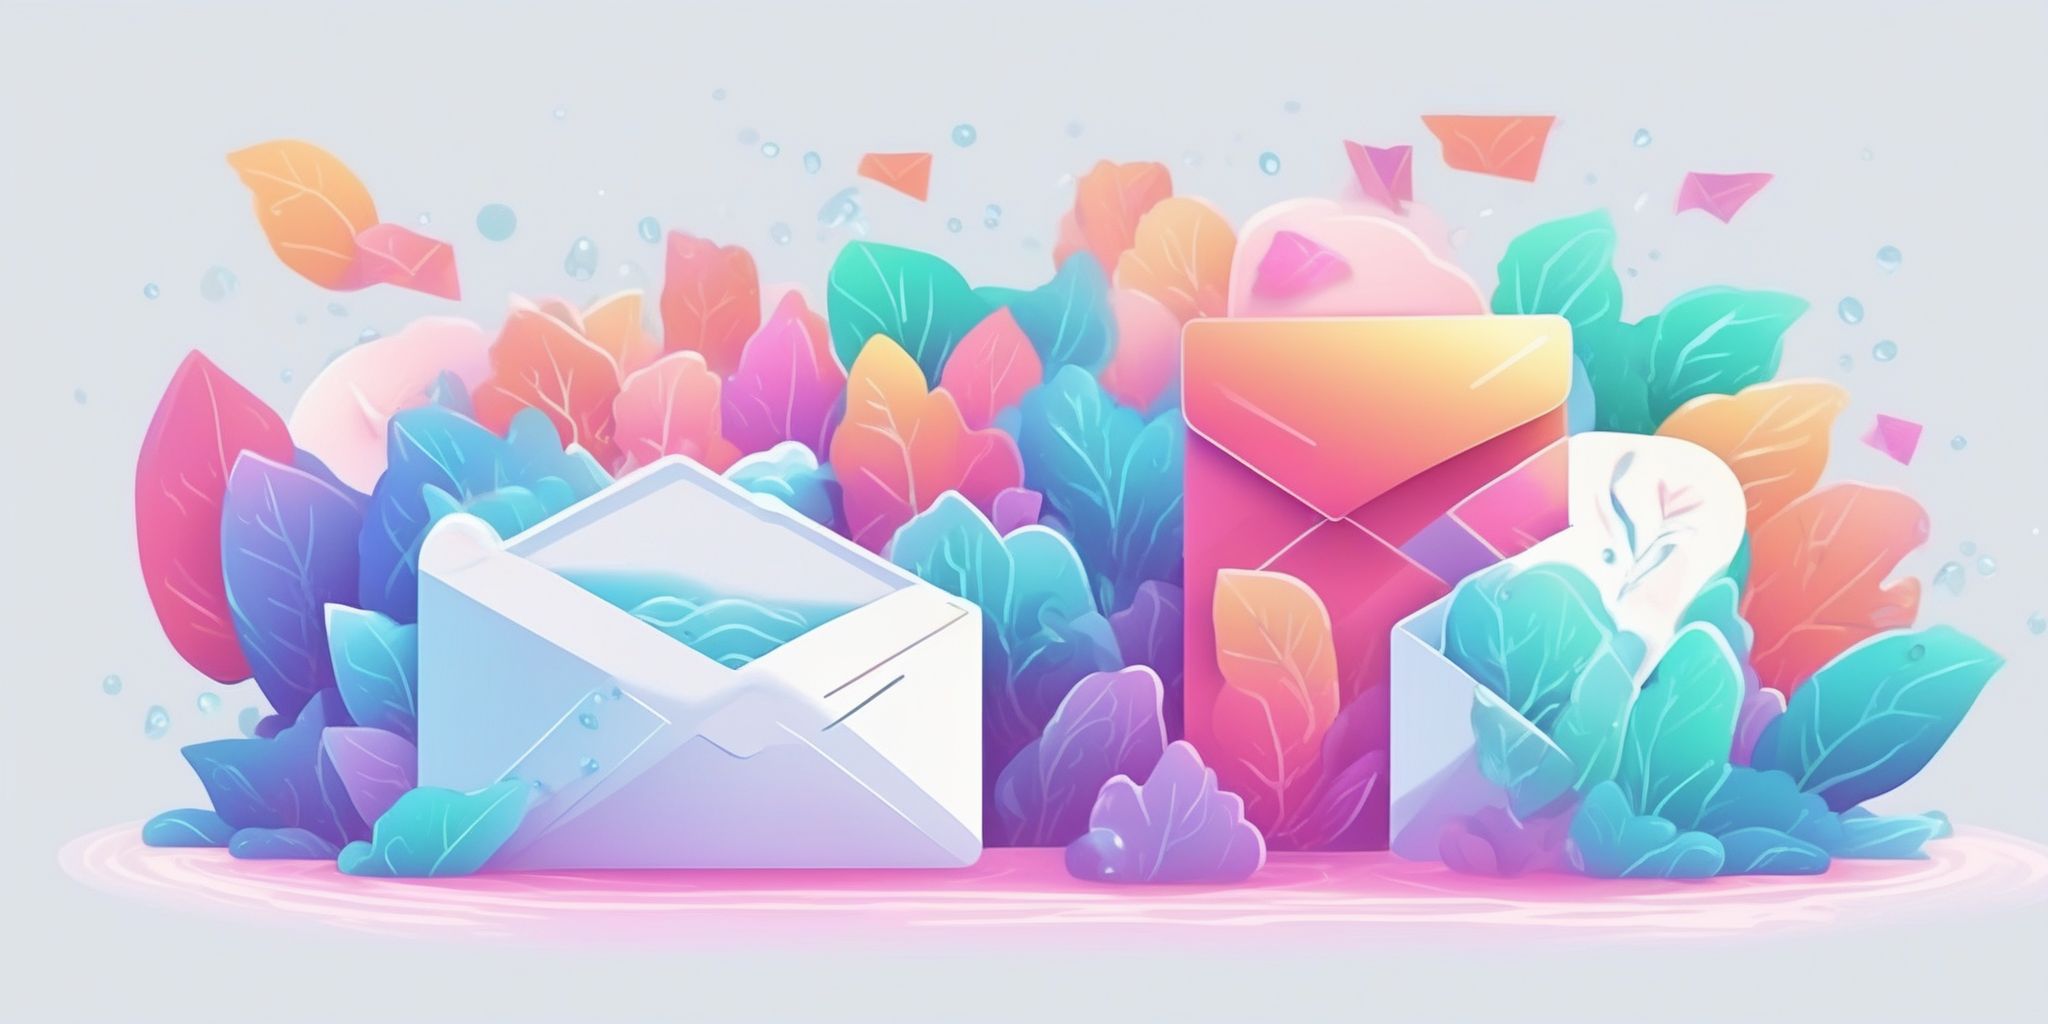 Flooded inbox in illustration style with gradients and white background